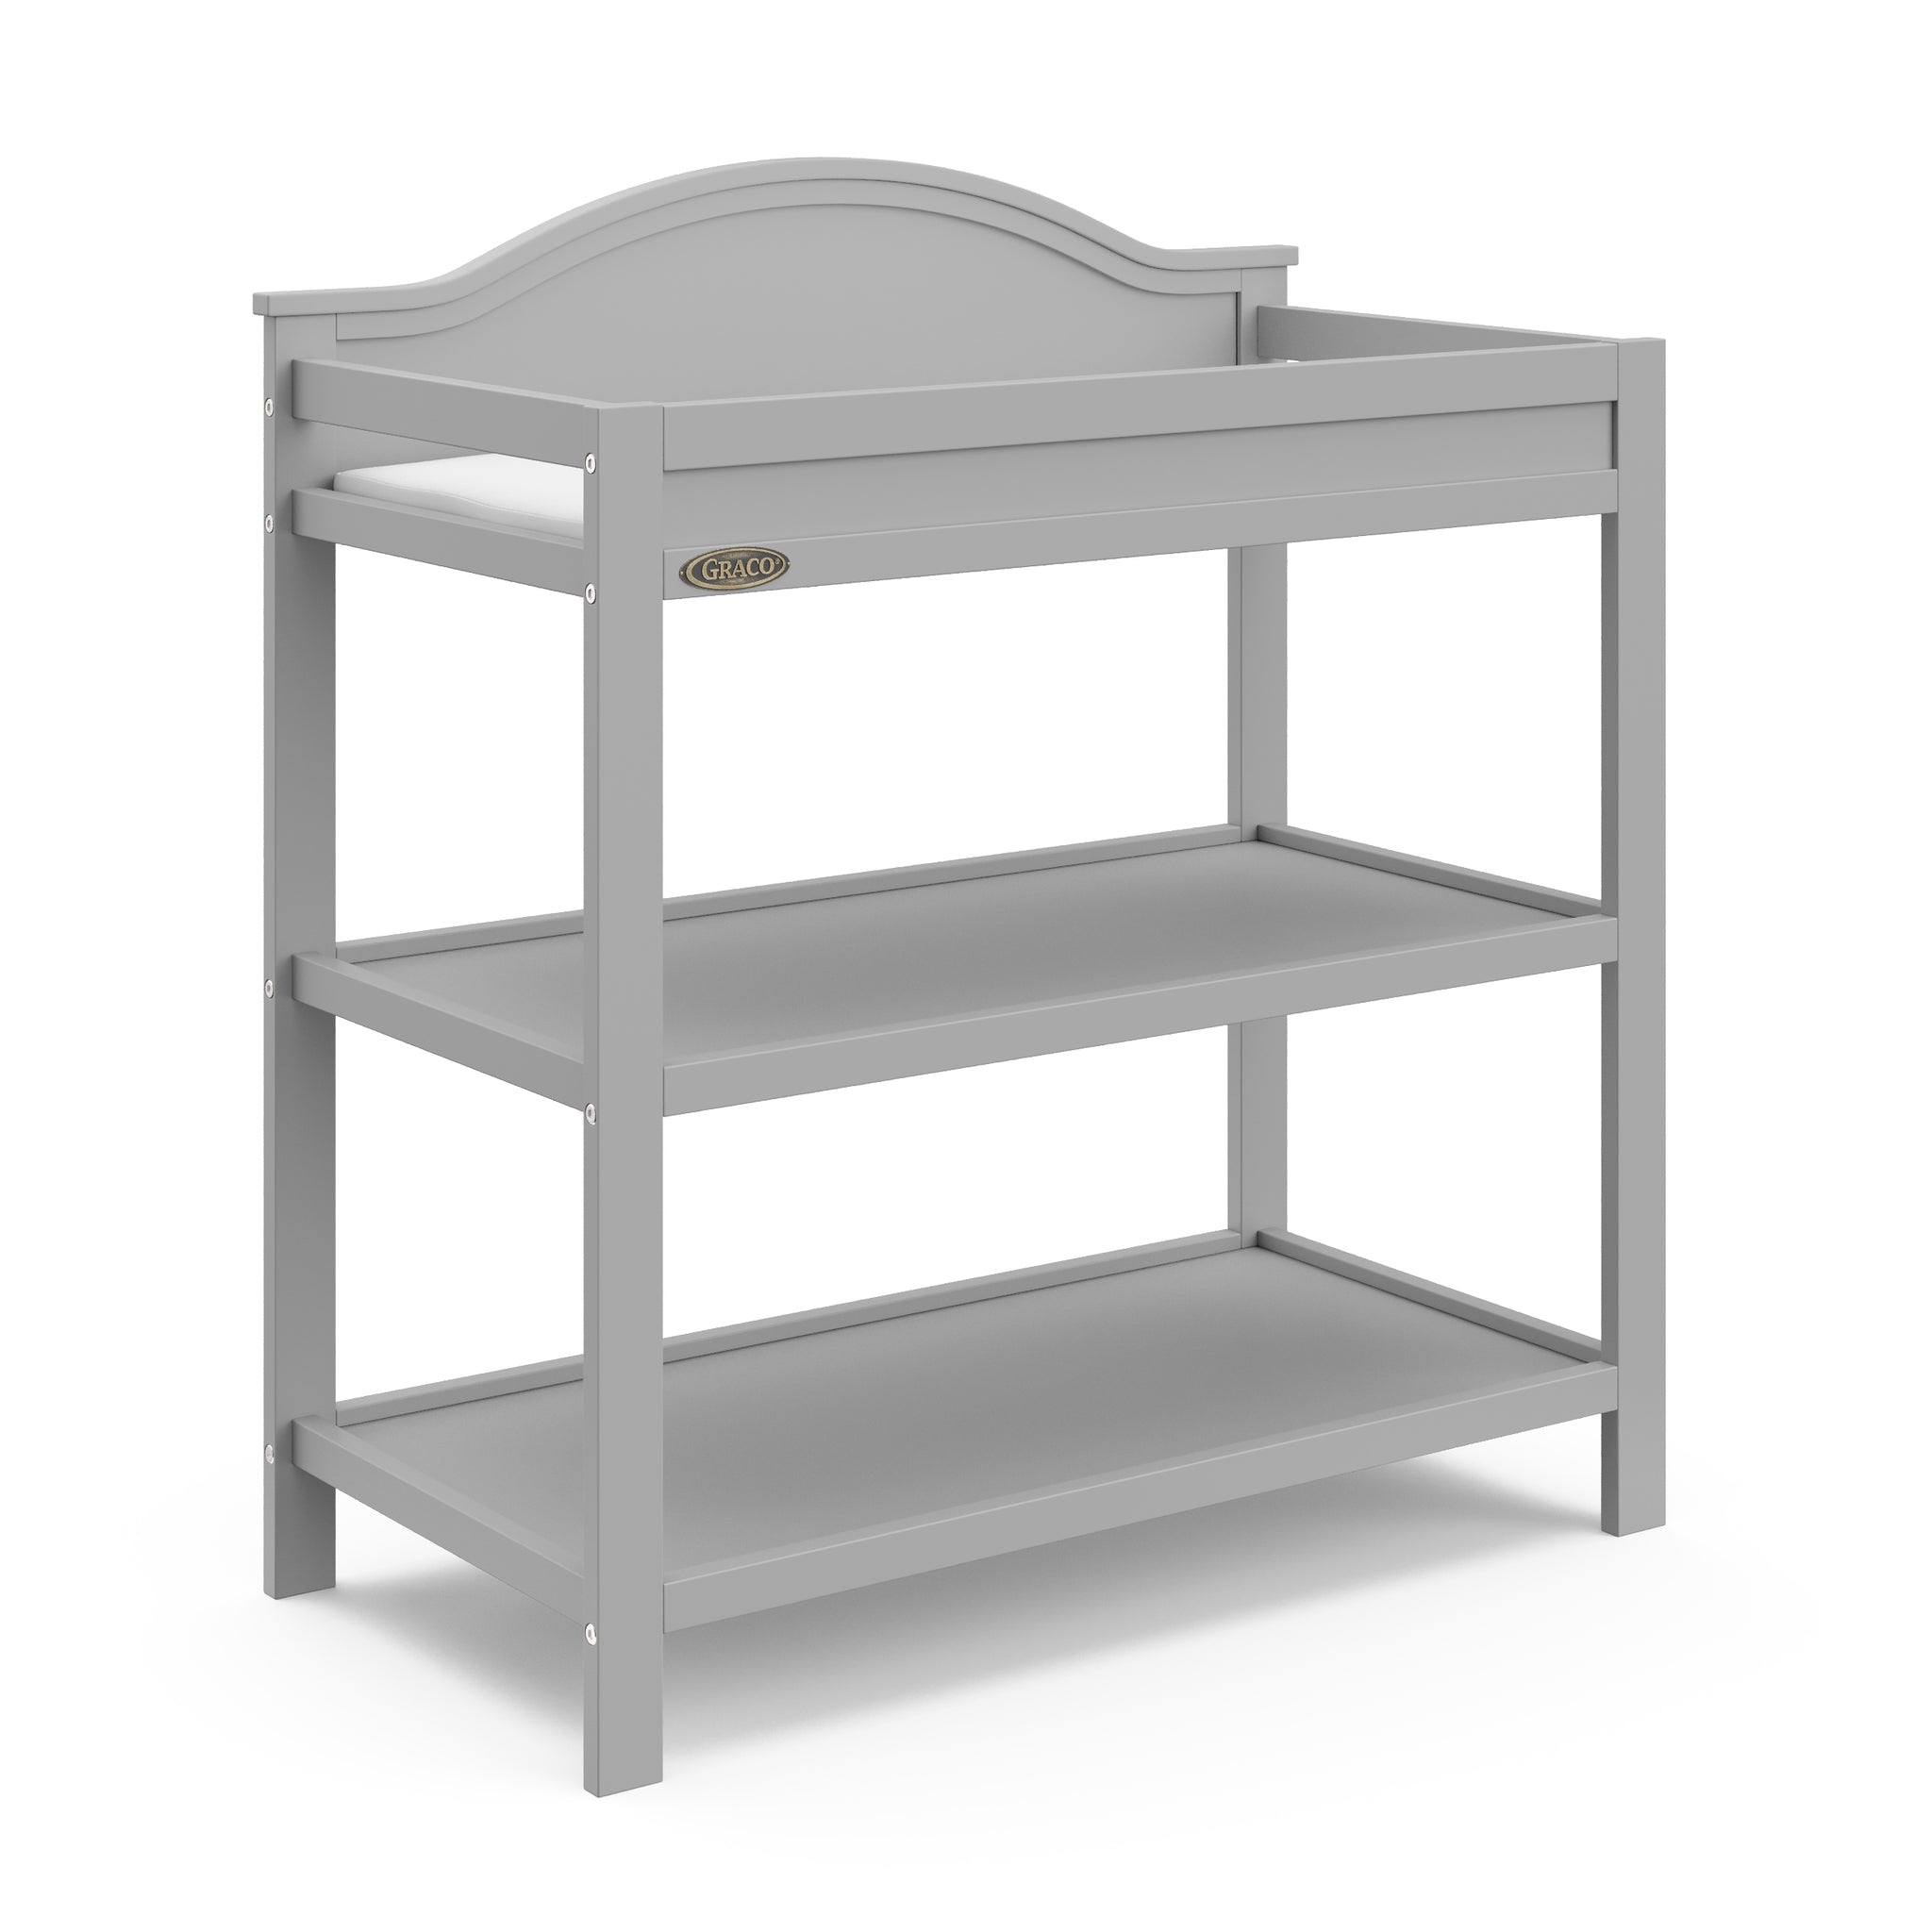  Pebble gray angled changing table with two open shelves